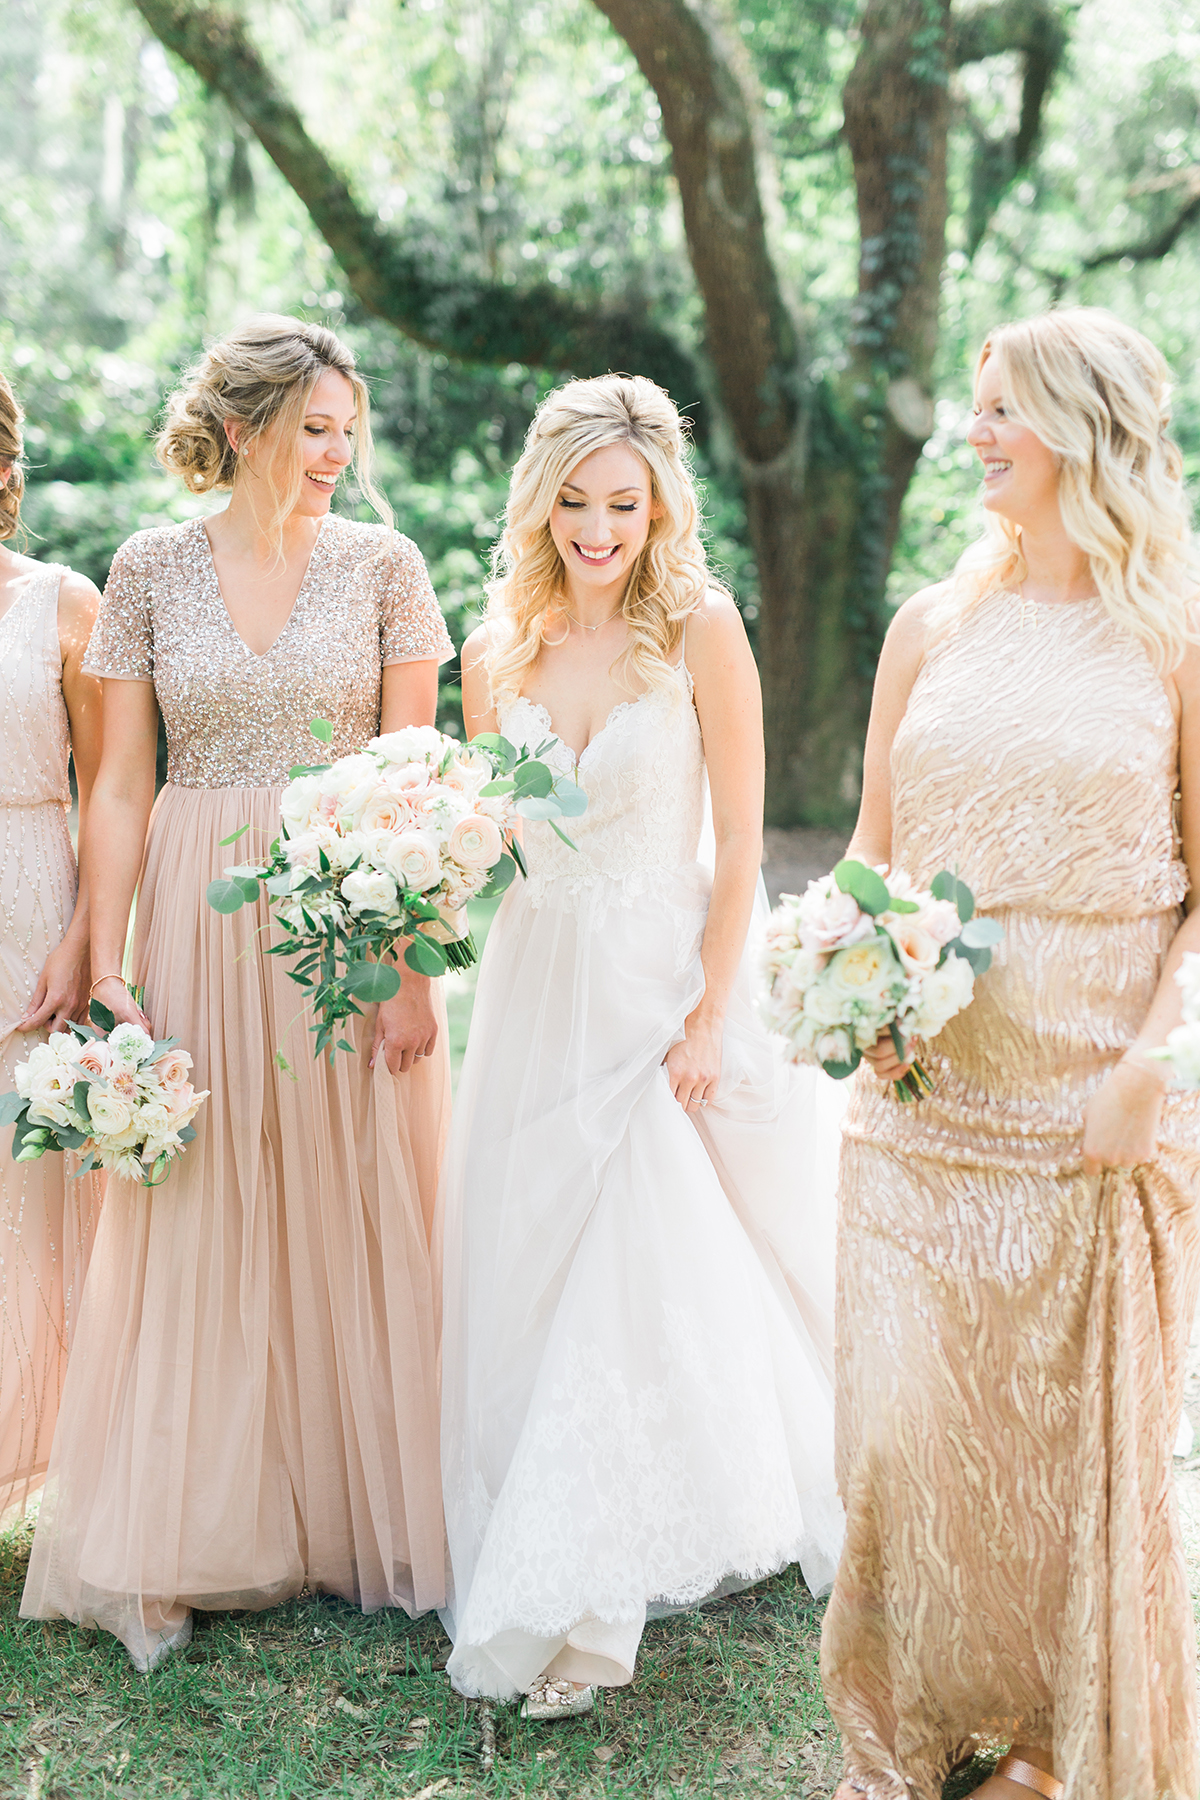 Blush And Champagne Bridesmaid Dresses - nelsonismissing